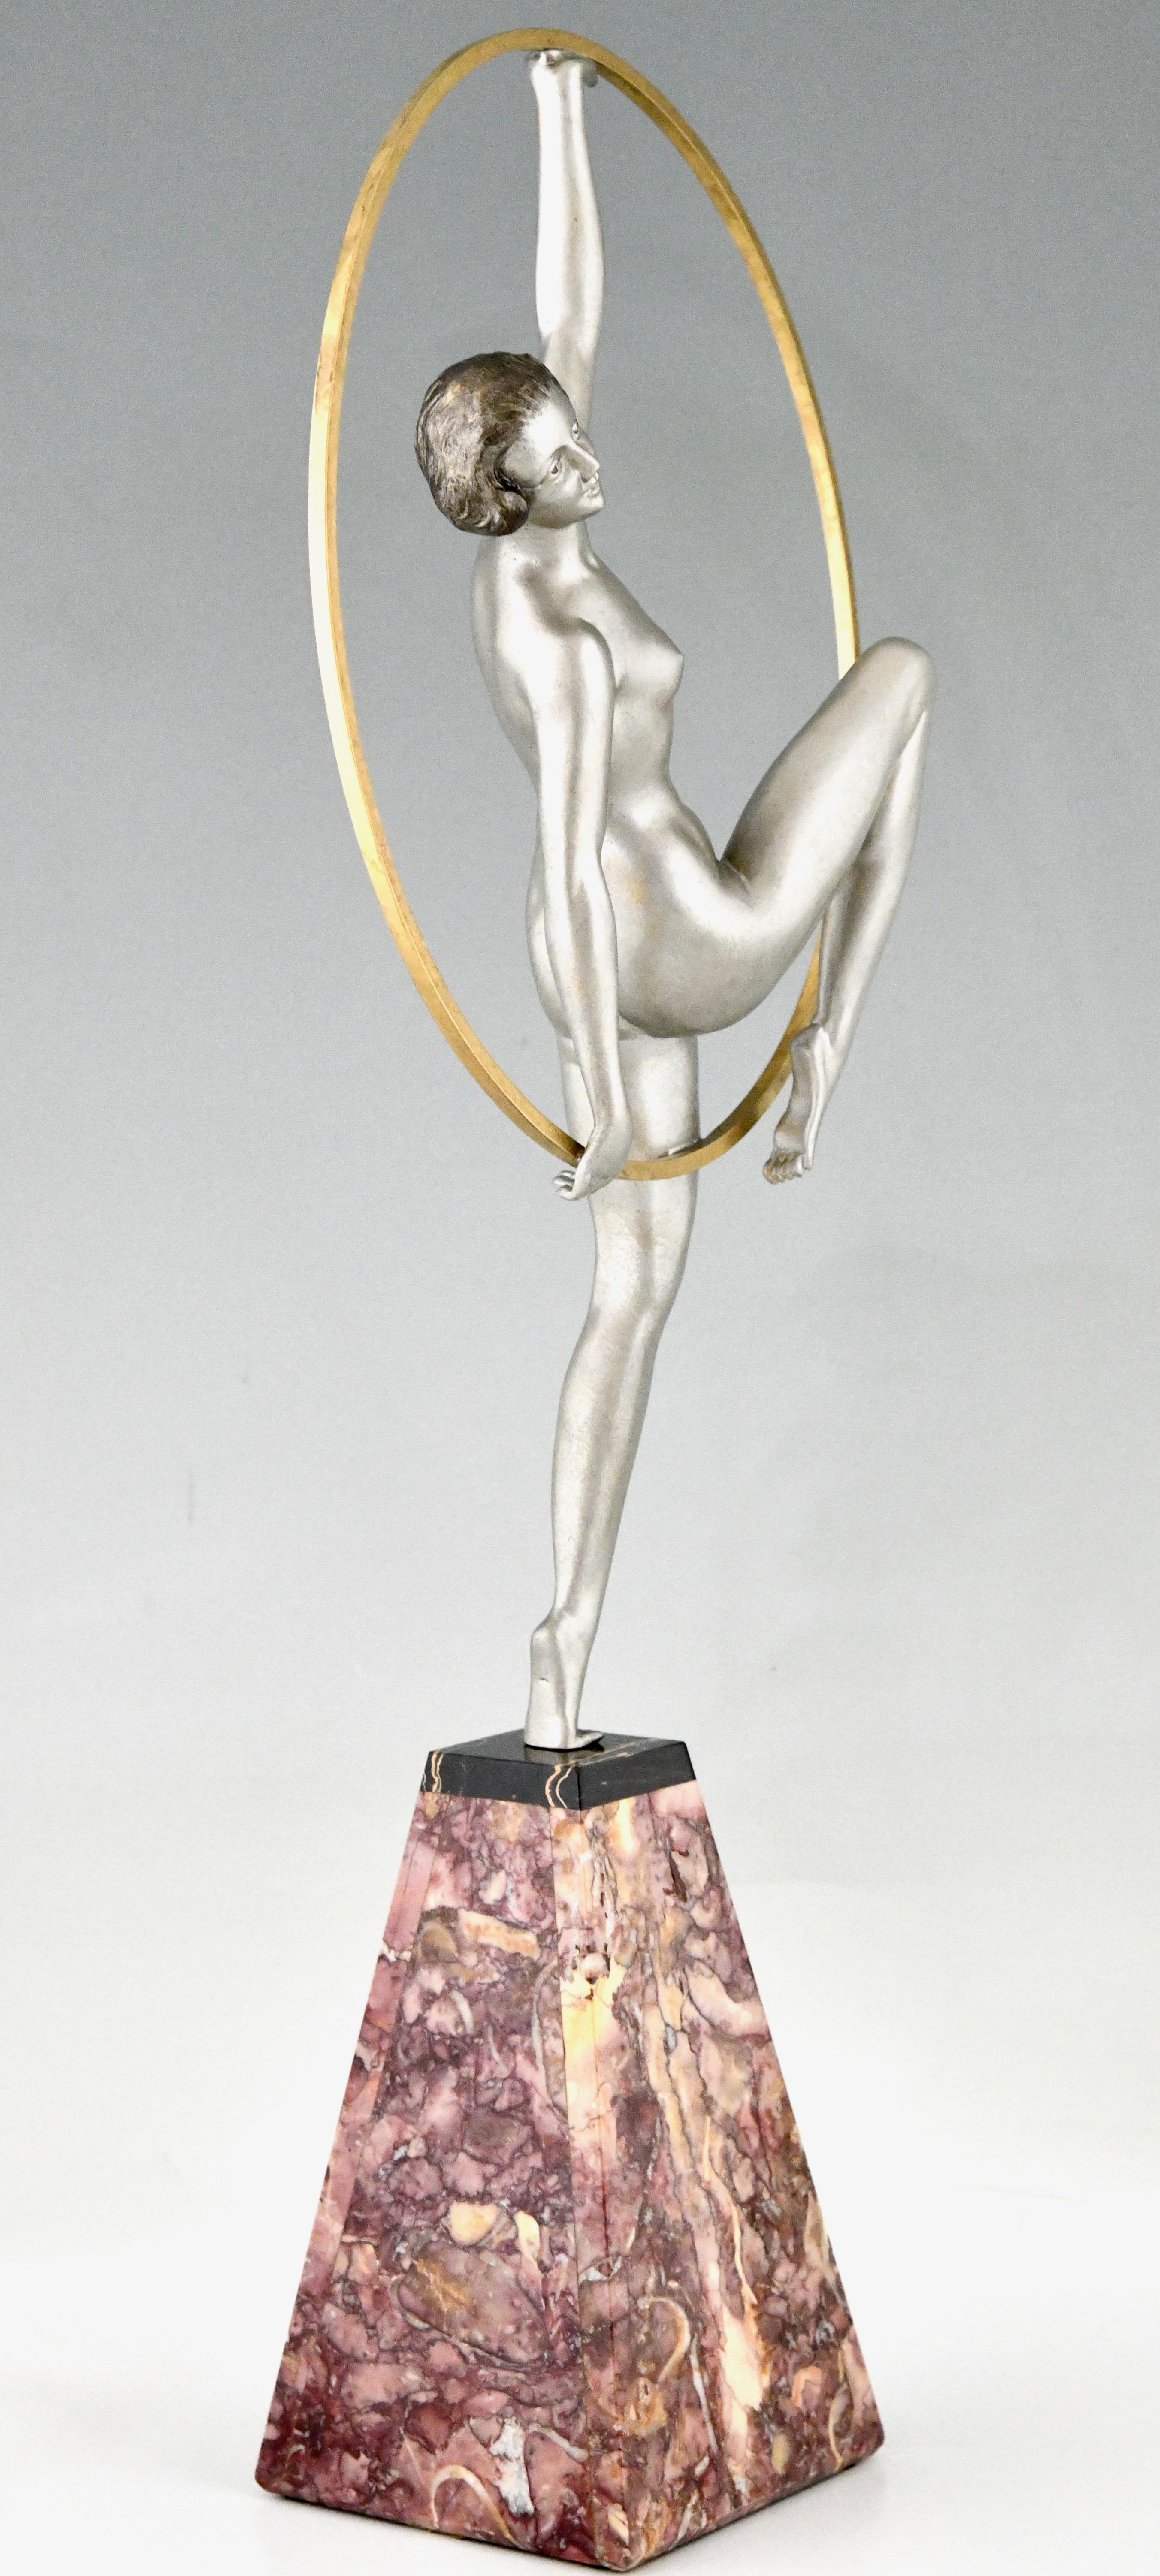 Patinated Art Deco sculpture hoop dancer by Limousin France 1930 For Sale